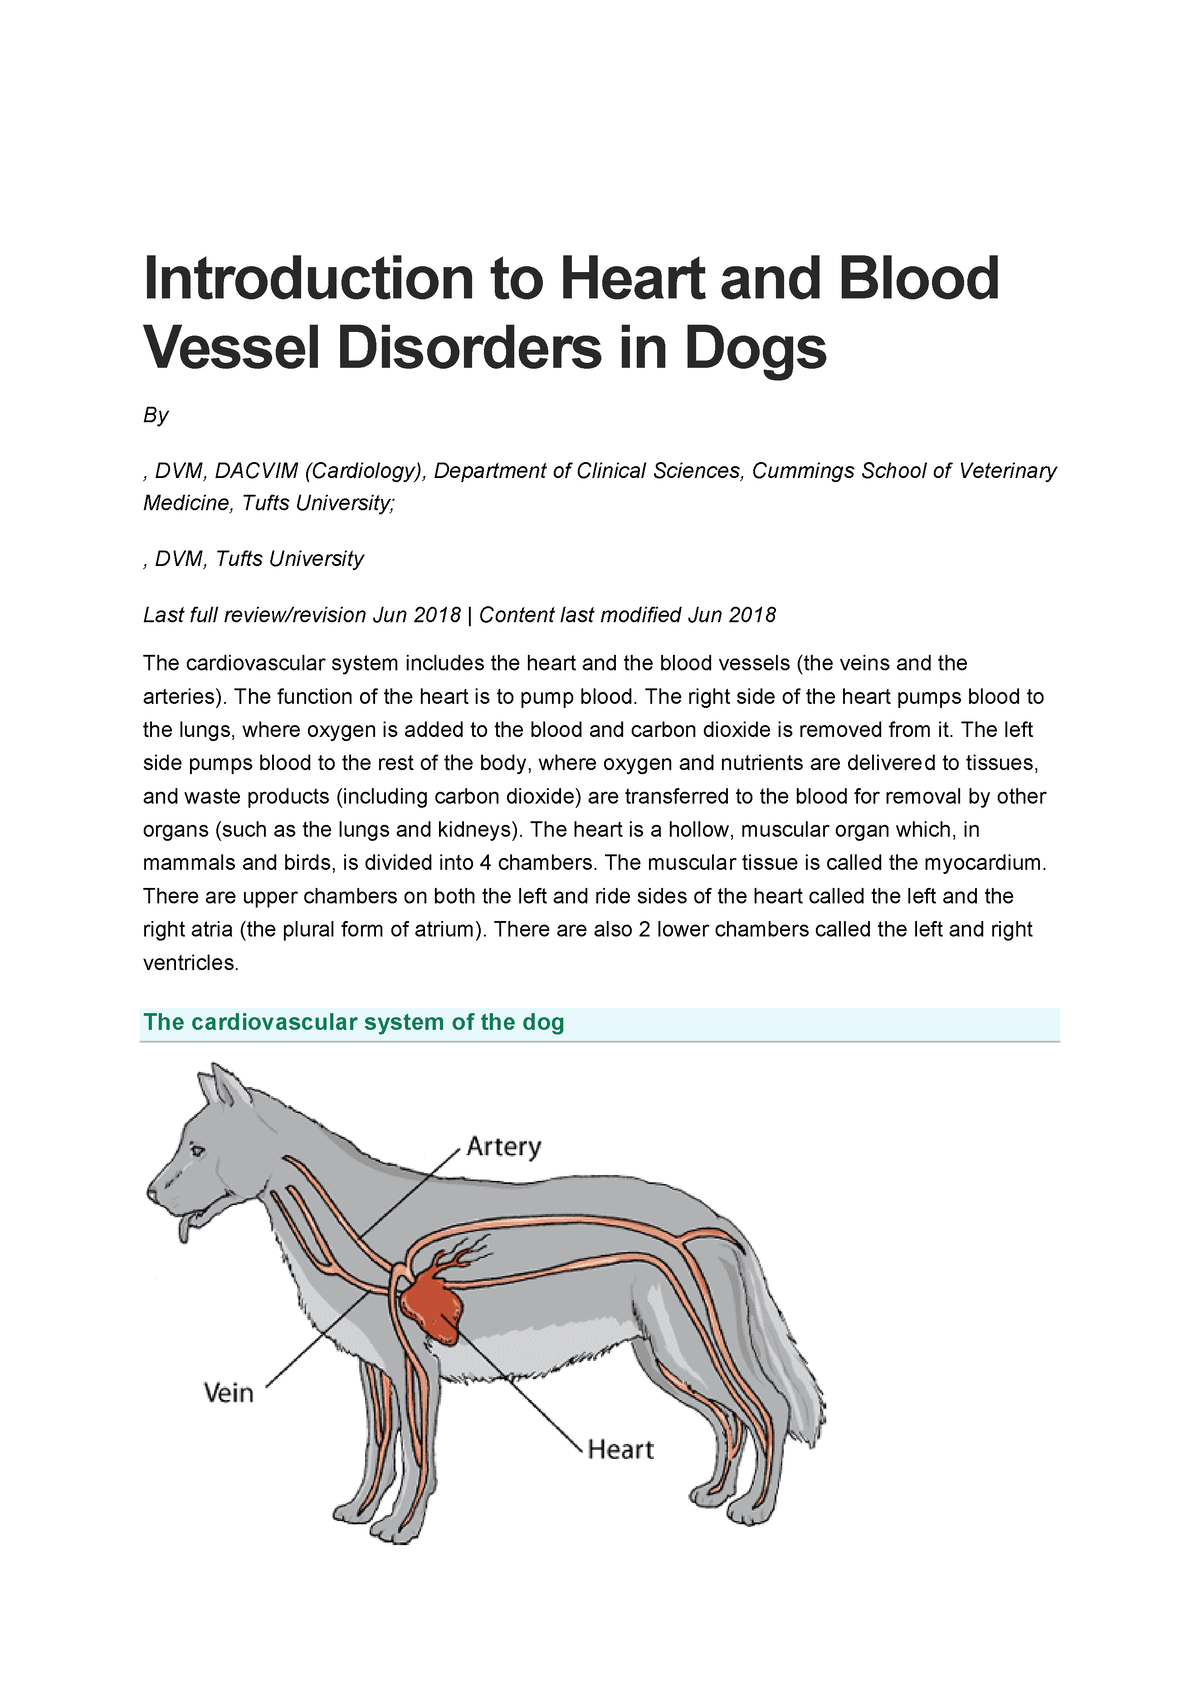 introduction-to-heart-and-blood-vessel-disorders-in-dogs-the-function-of-the-heart-is-to-pump